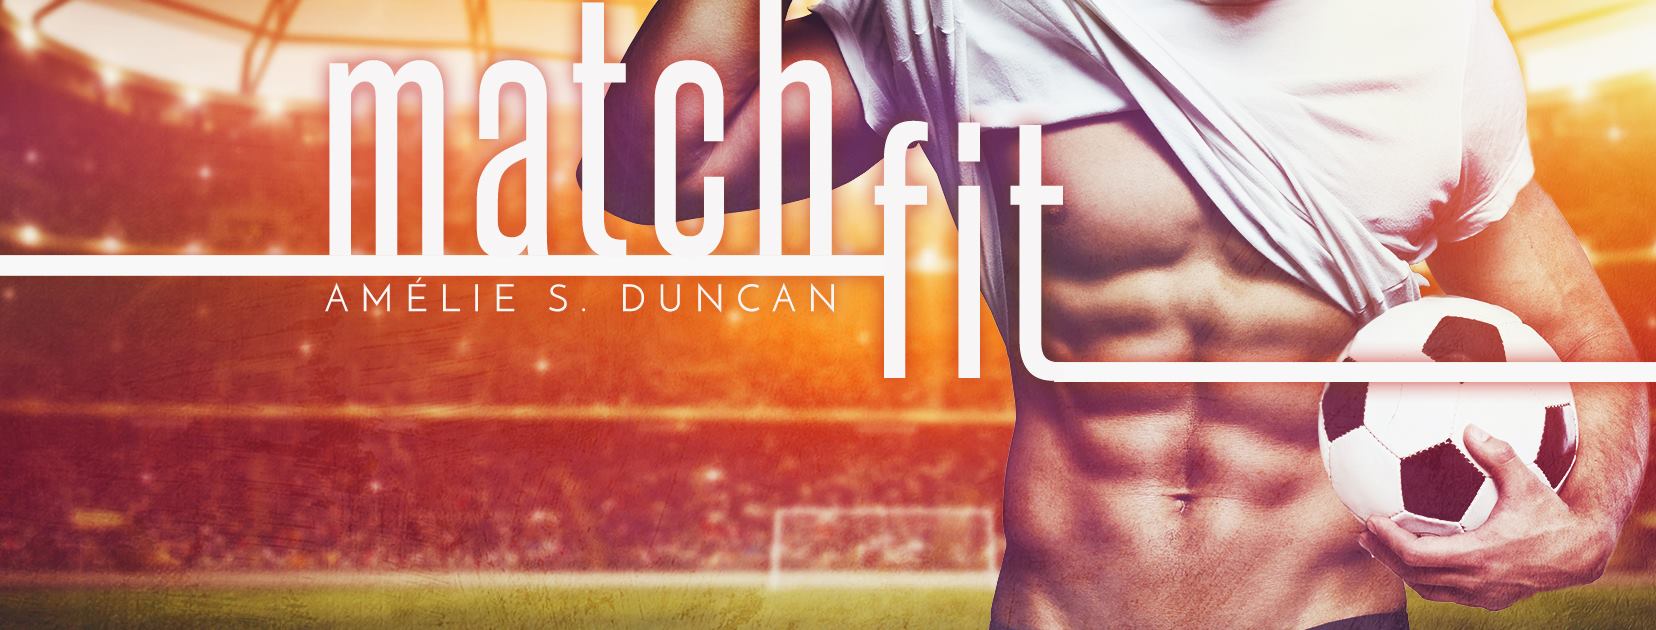 Match Fit by Amelie S Duncan banner